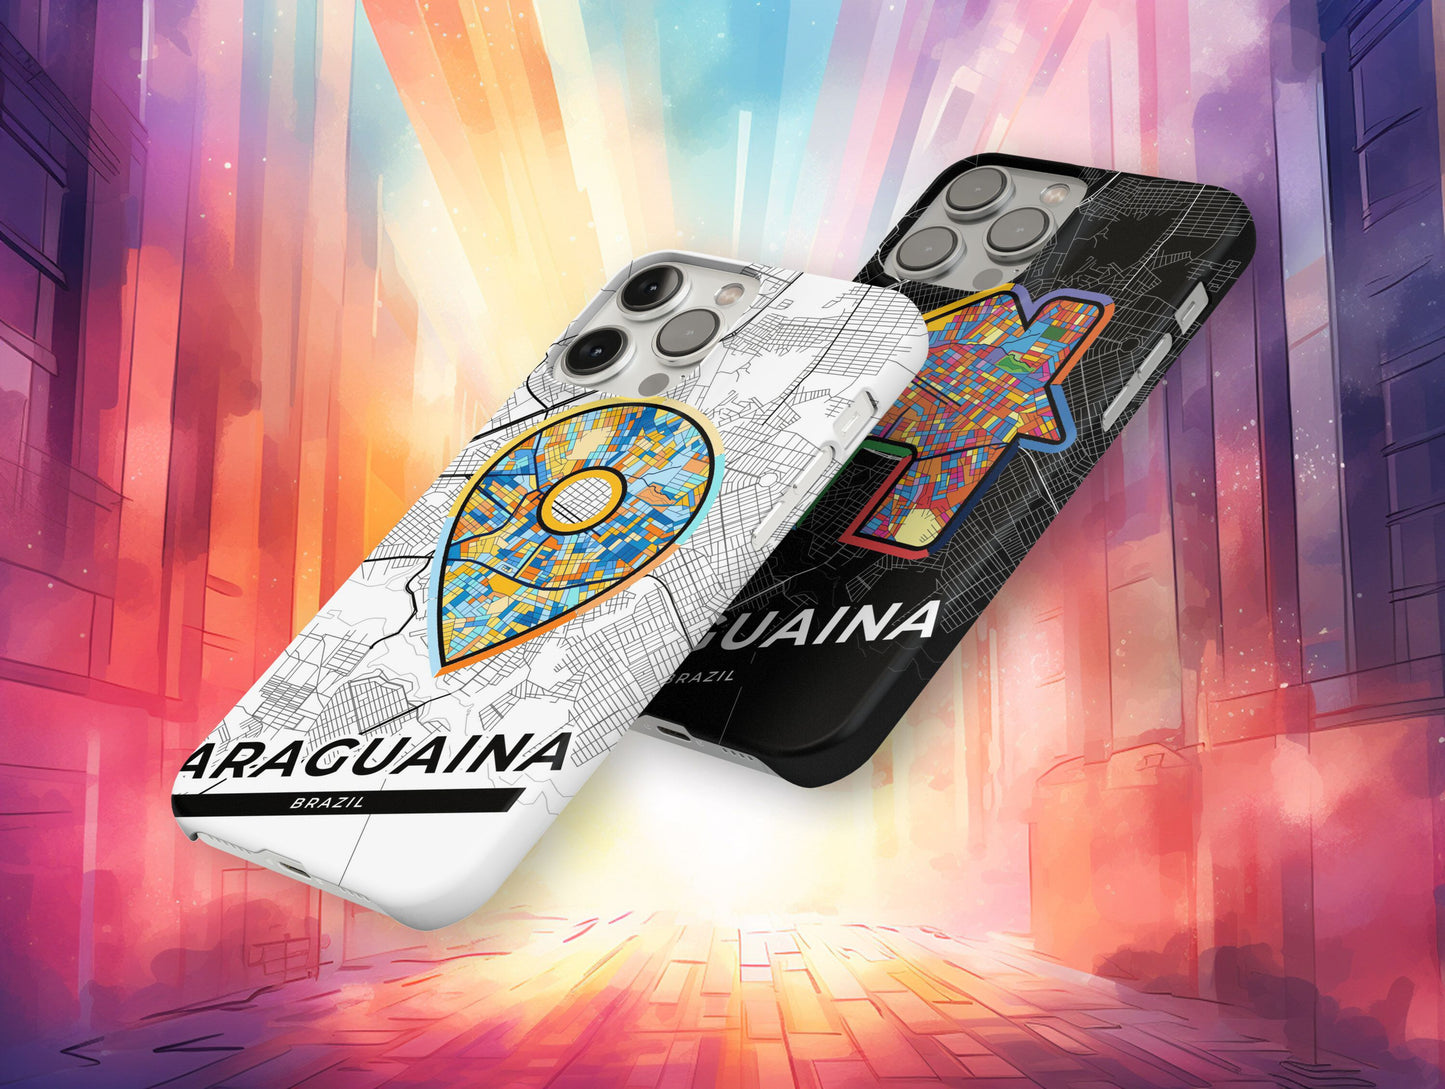 Araguaina Brazil slim phone case with colorful icon. Birthday, wedding or housewarming gift. Couple match cases.